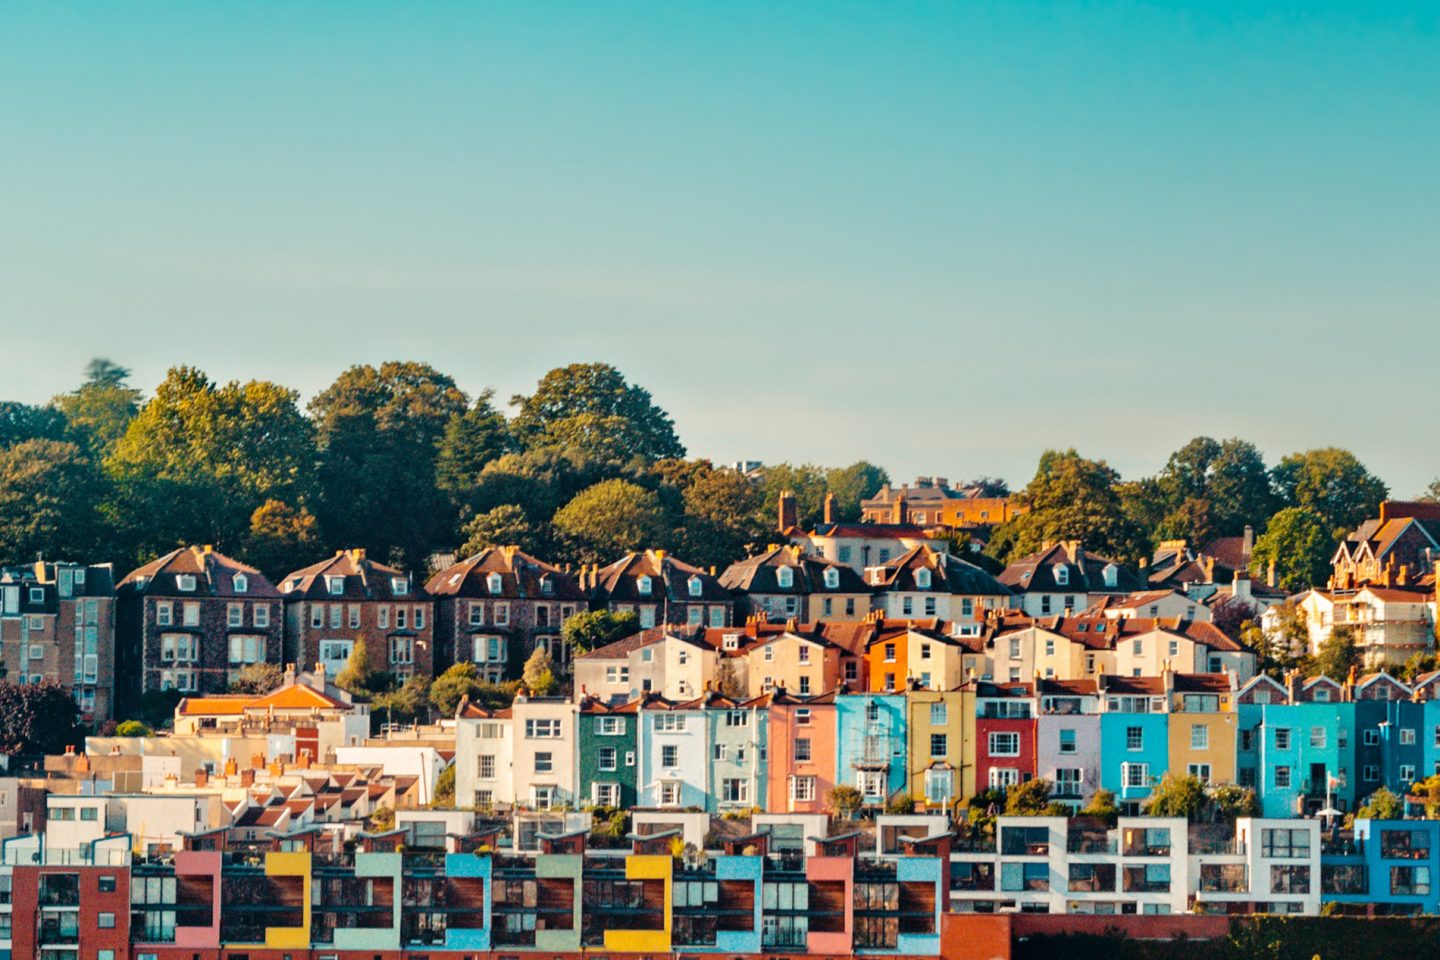 10 best places to live in Bristol according to residents | HomeViews